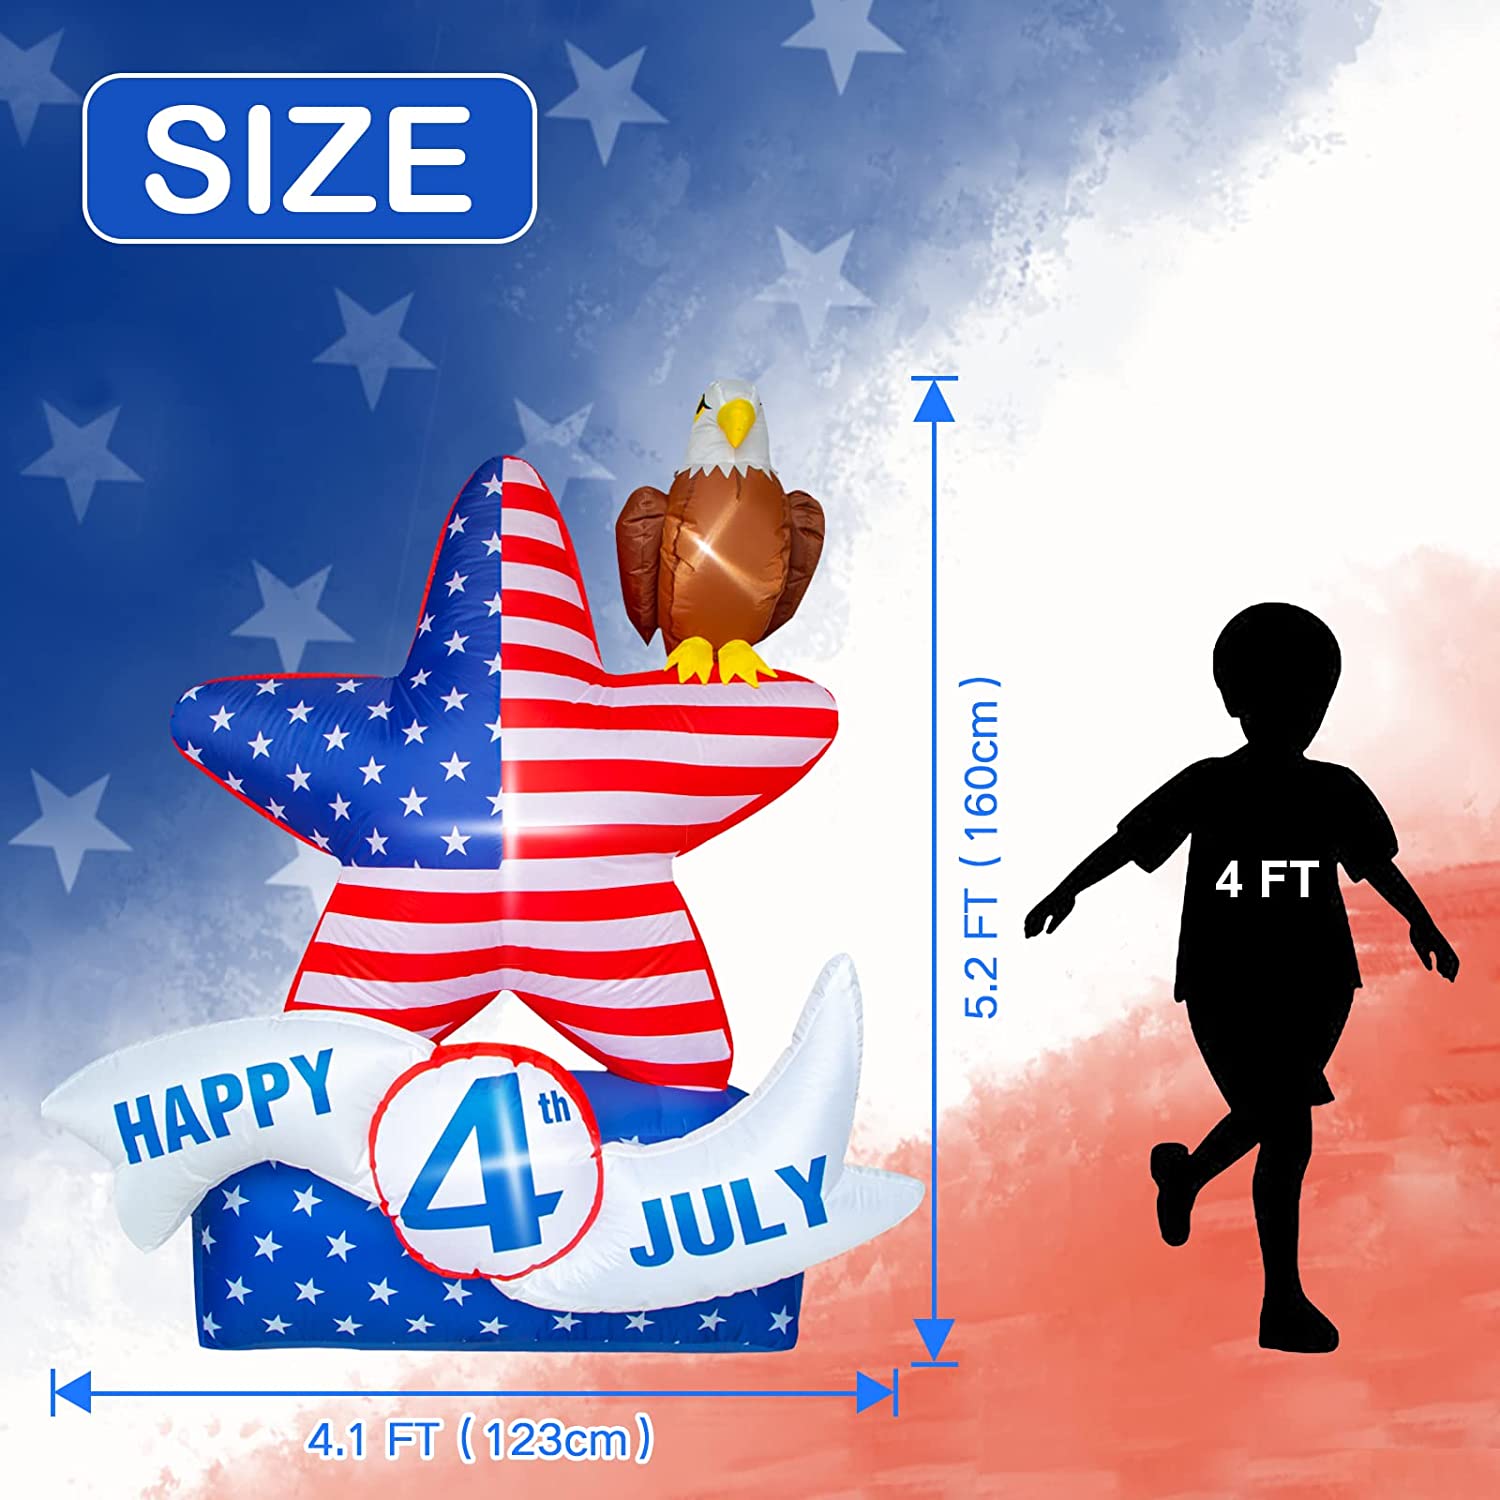 5.2FT 4th of July Inflatable Decorations,Star American Flying Bald Eagle with Build-in LEDs